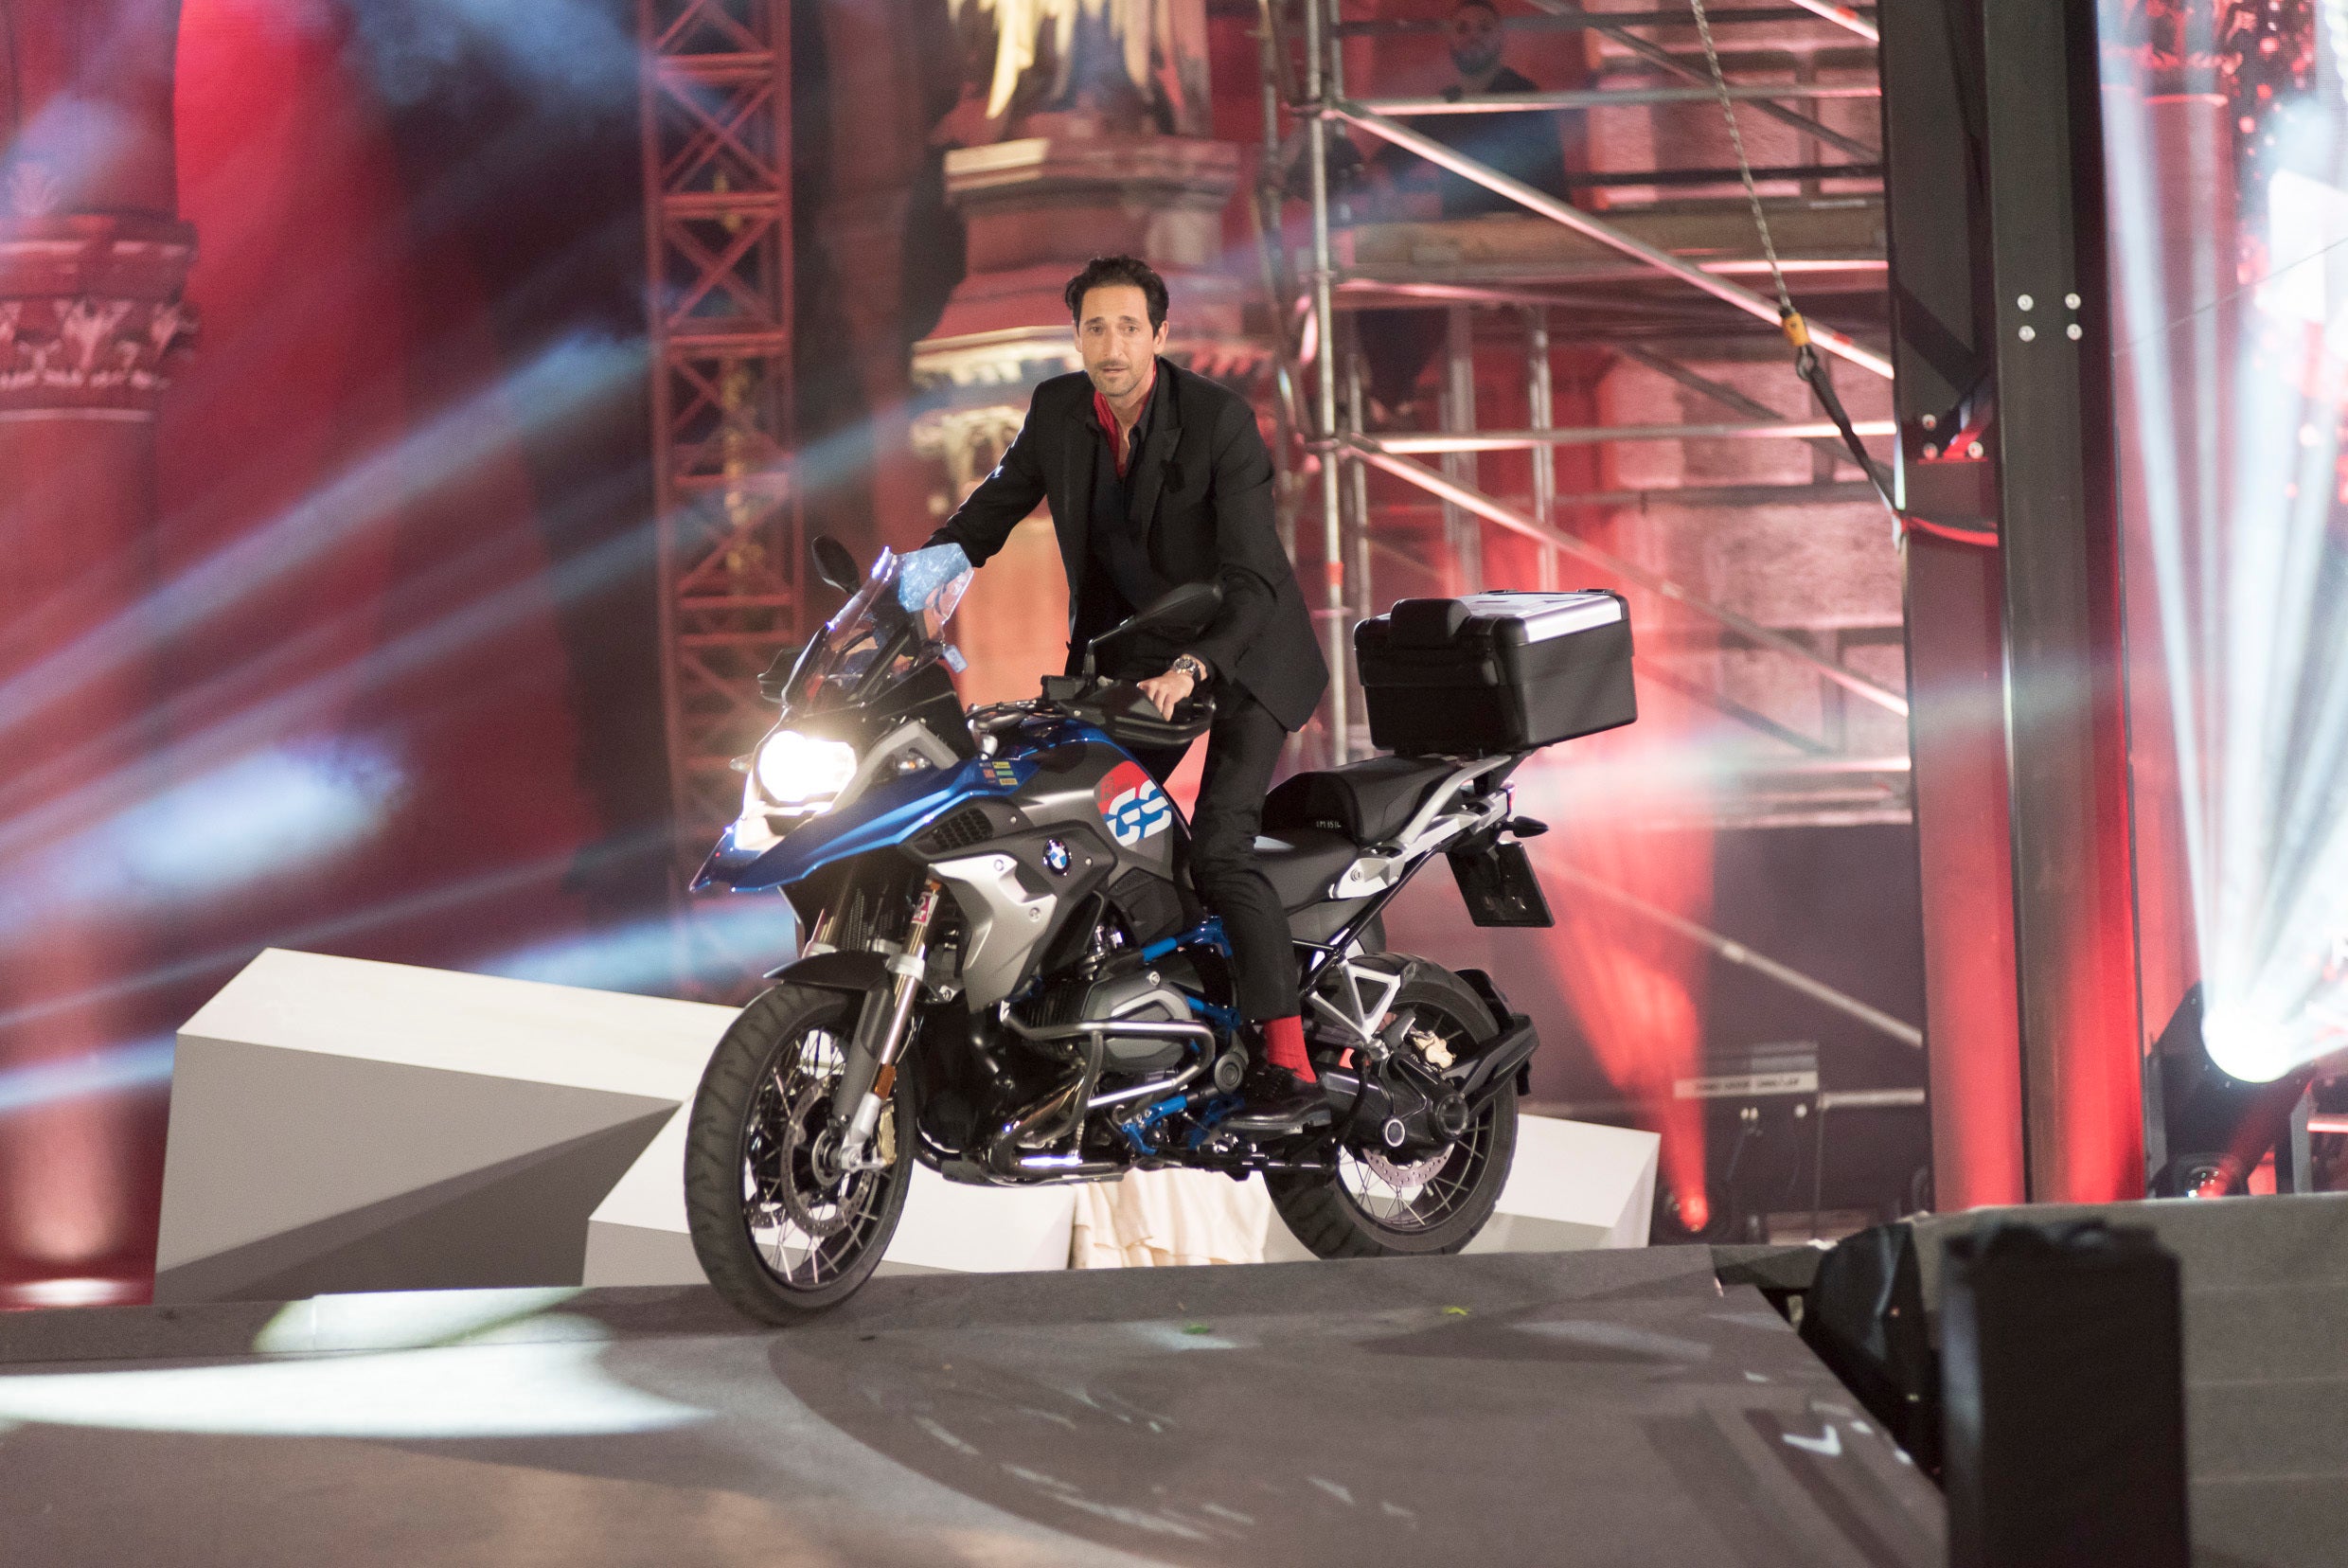 Adrien Brody on his motorcycle at the Life Ball pre-show. Credit: Life Ball/ Raimund Appel